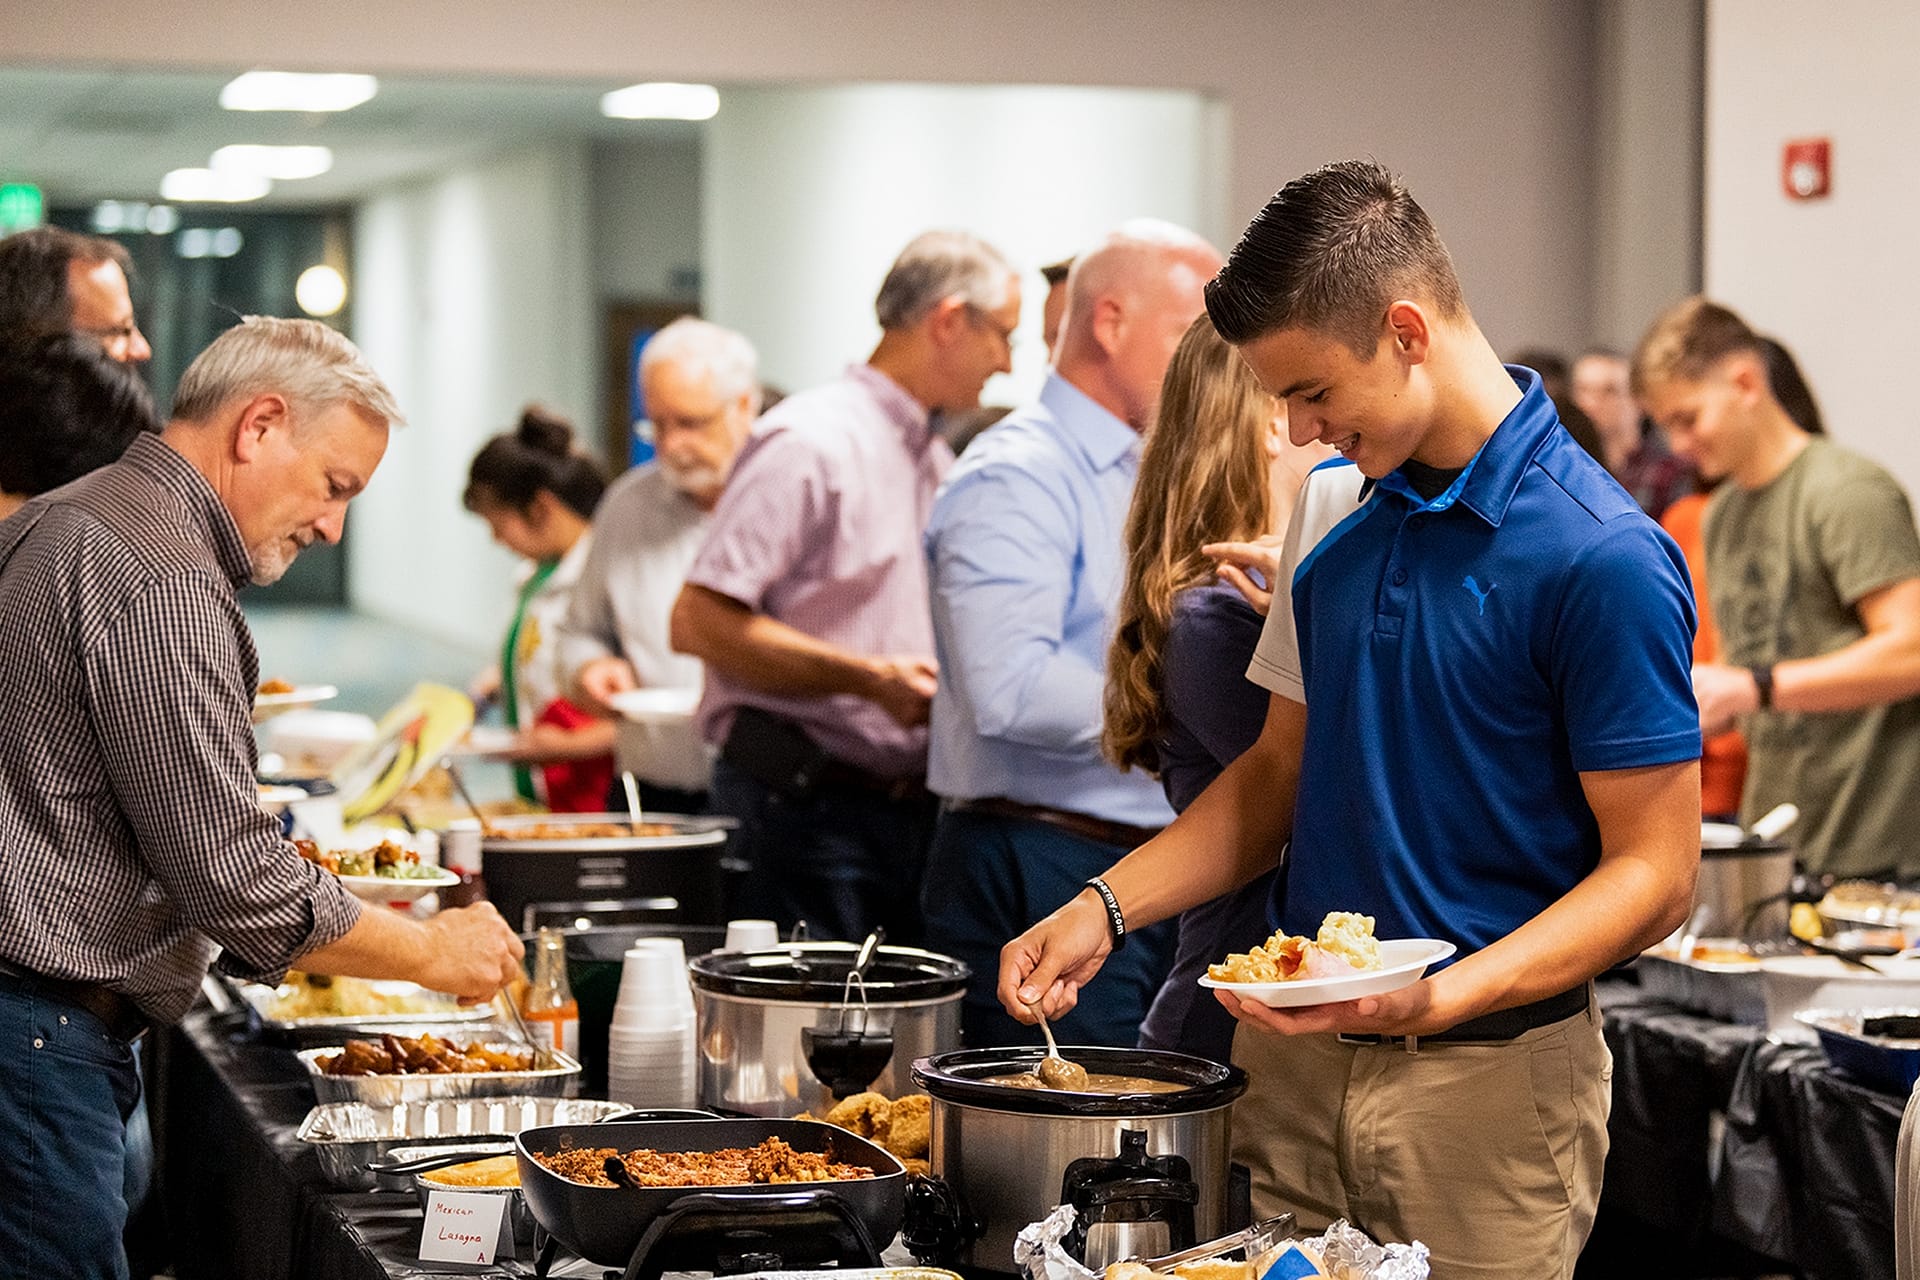 People serving themselves food at the Missionary dinner.